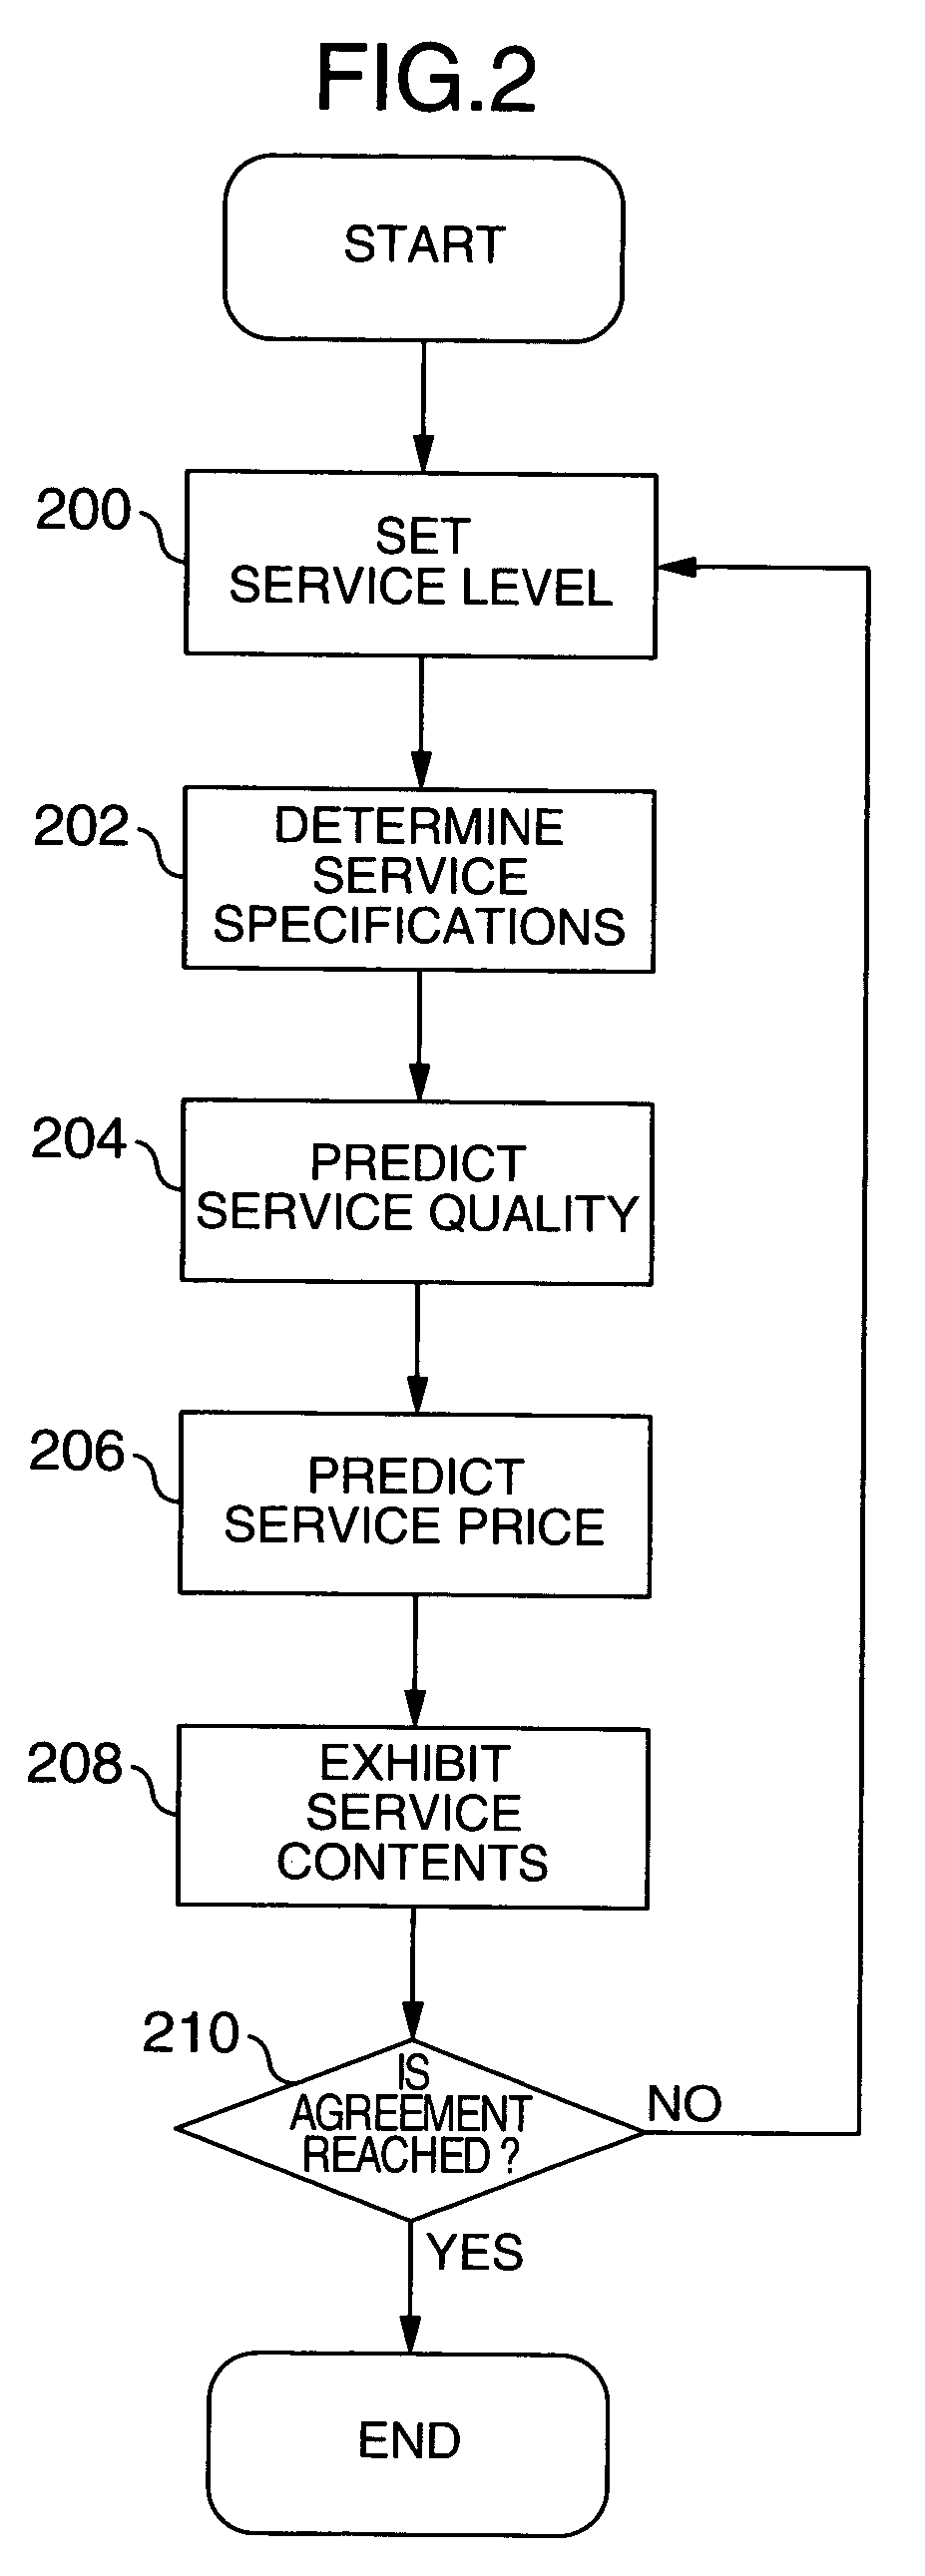 Service level agreements supporting apparatus